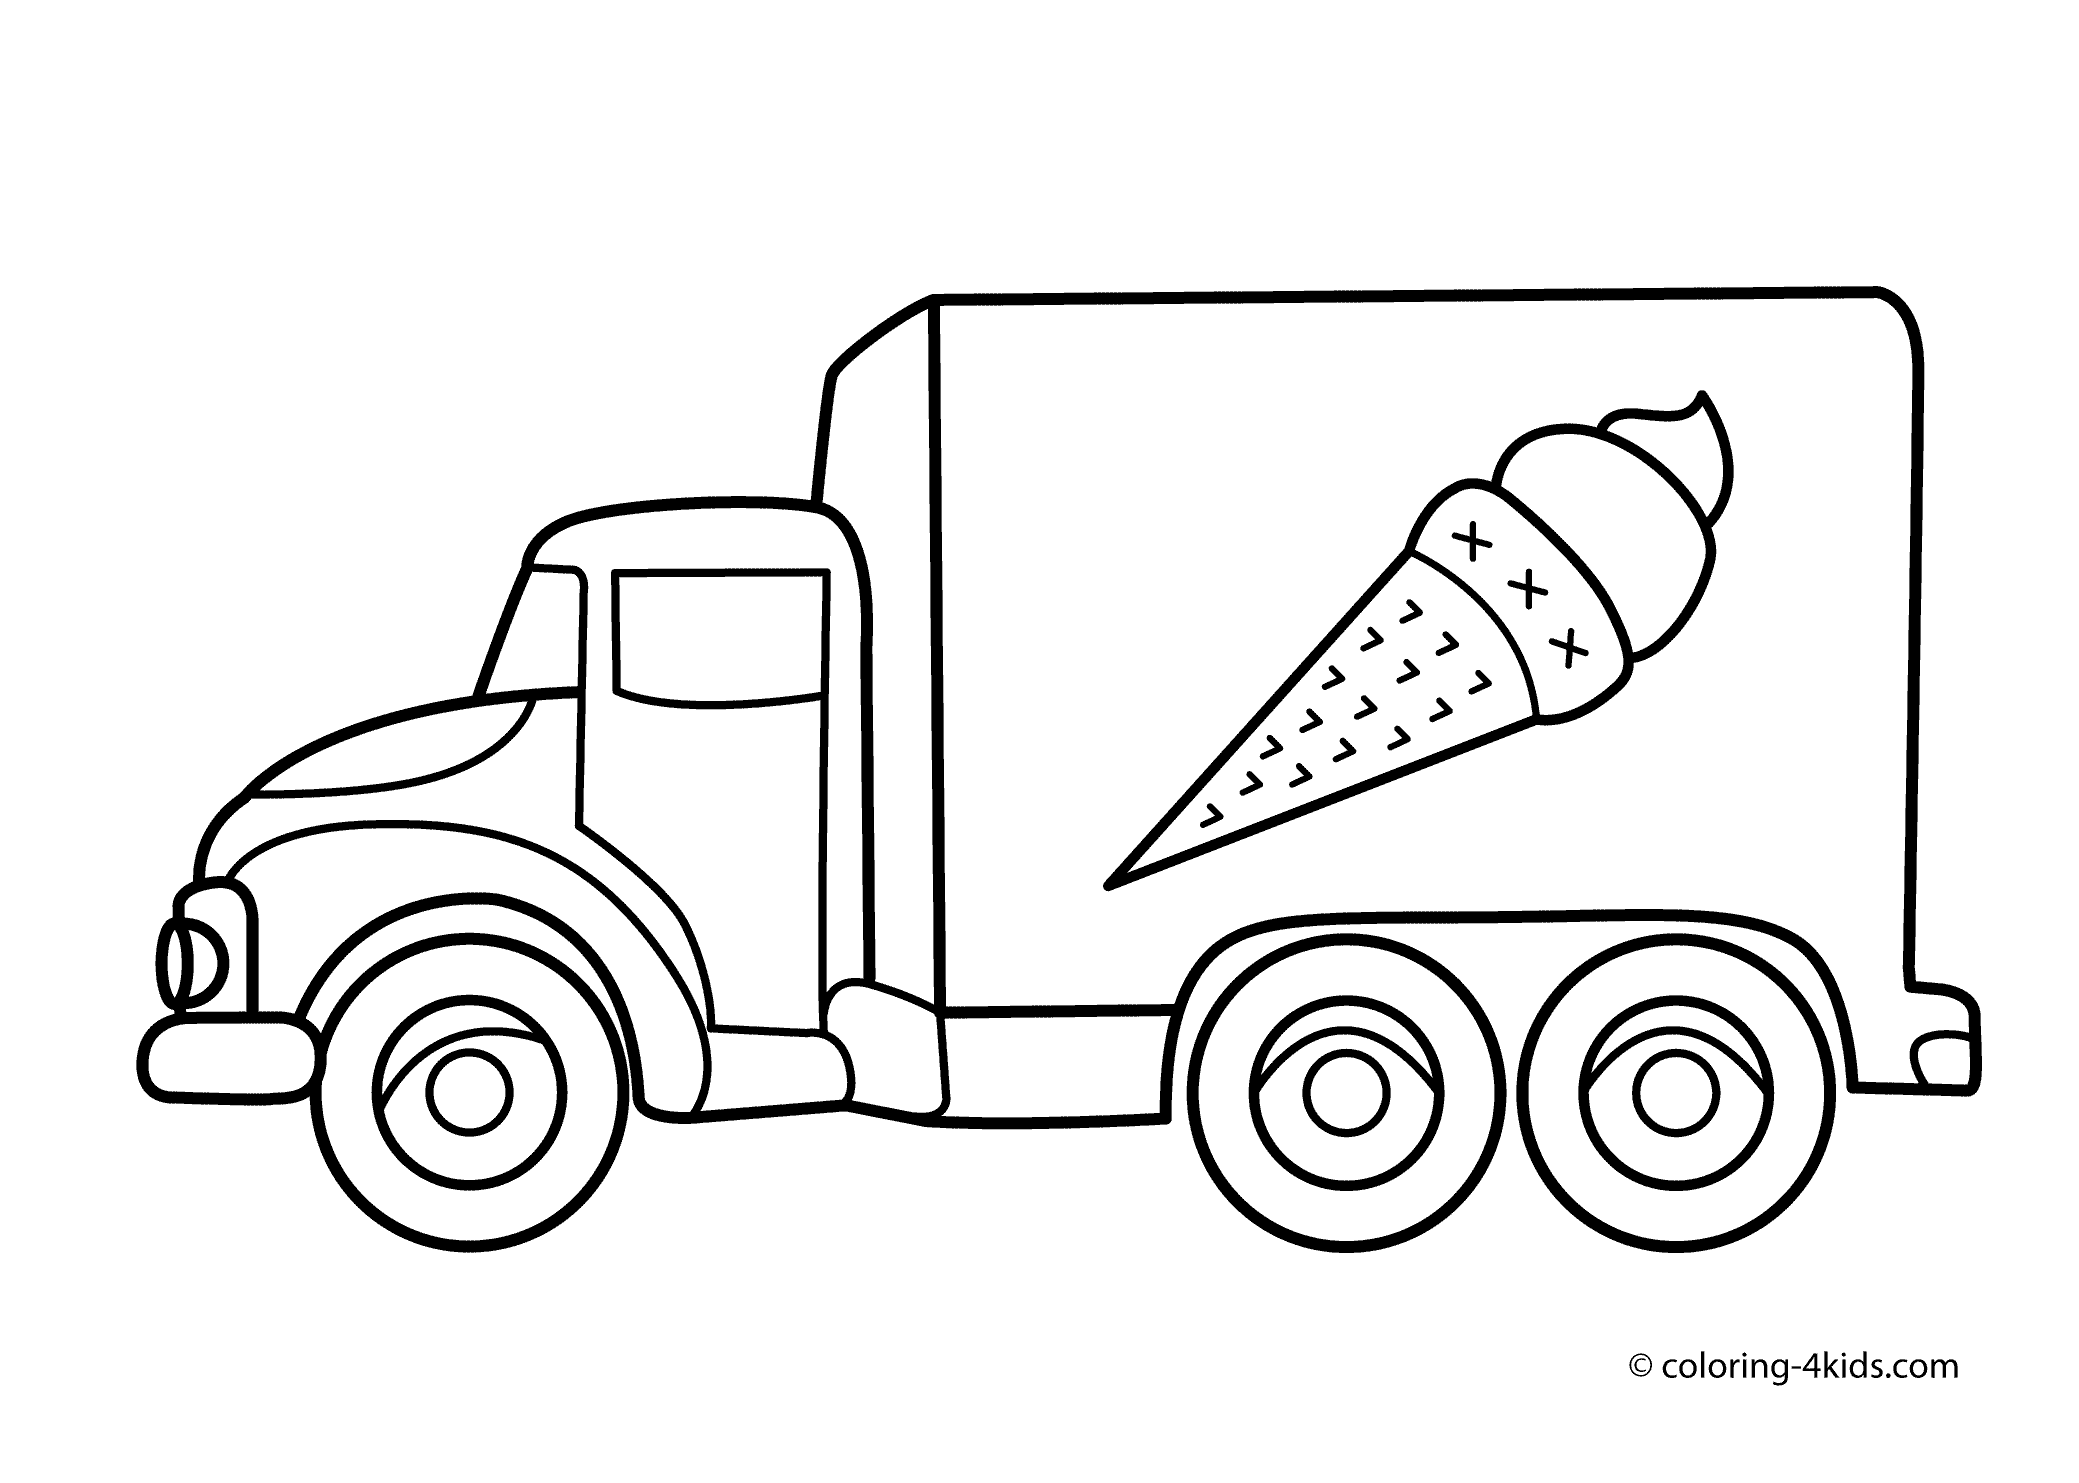 Free Truck Pictures For Kids, Download Free Truck Pictures For Kids png